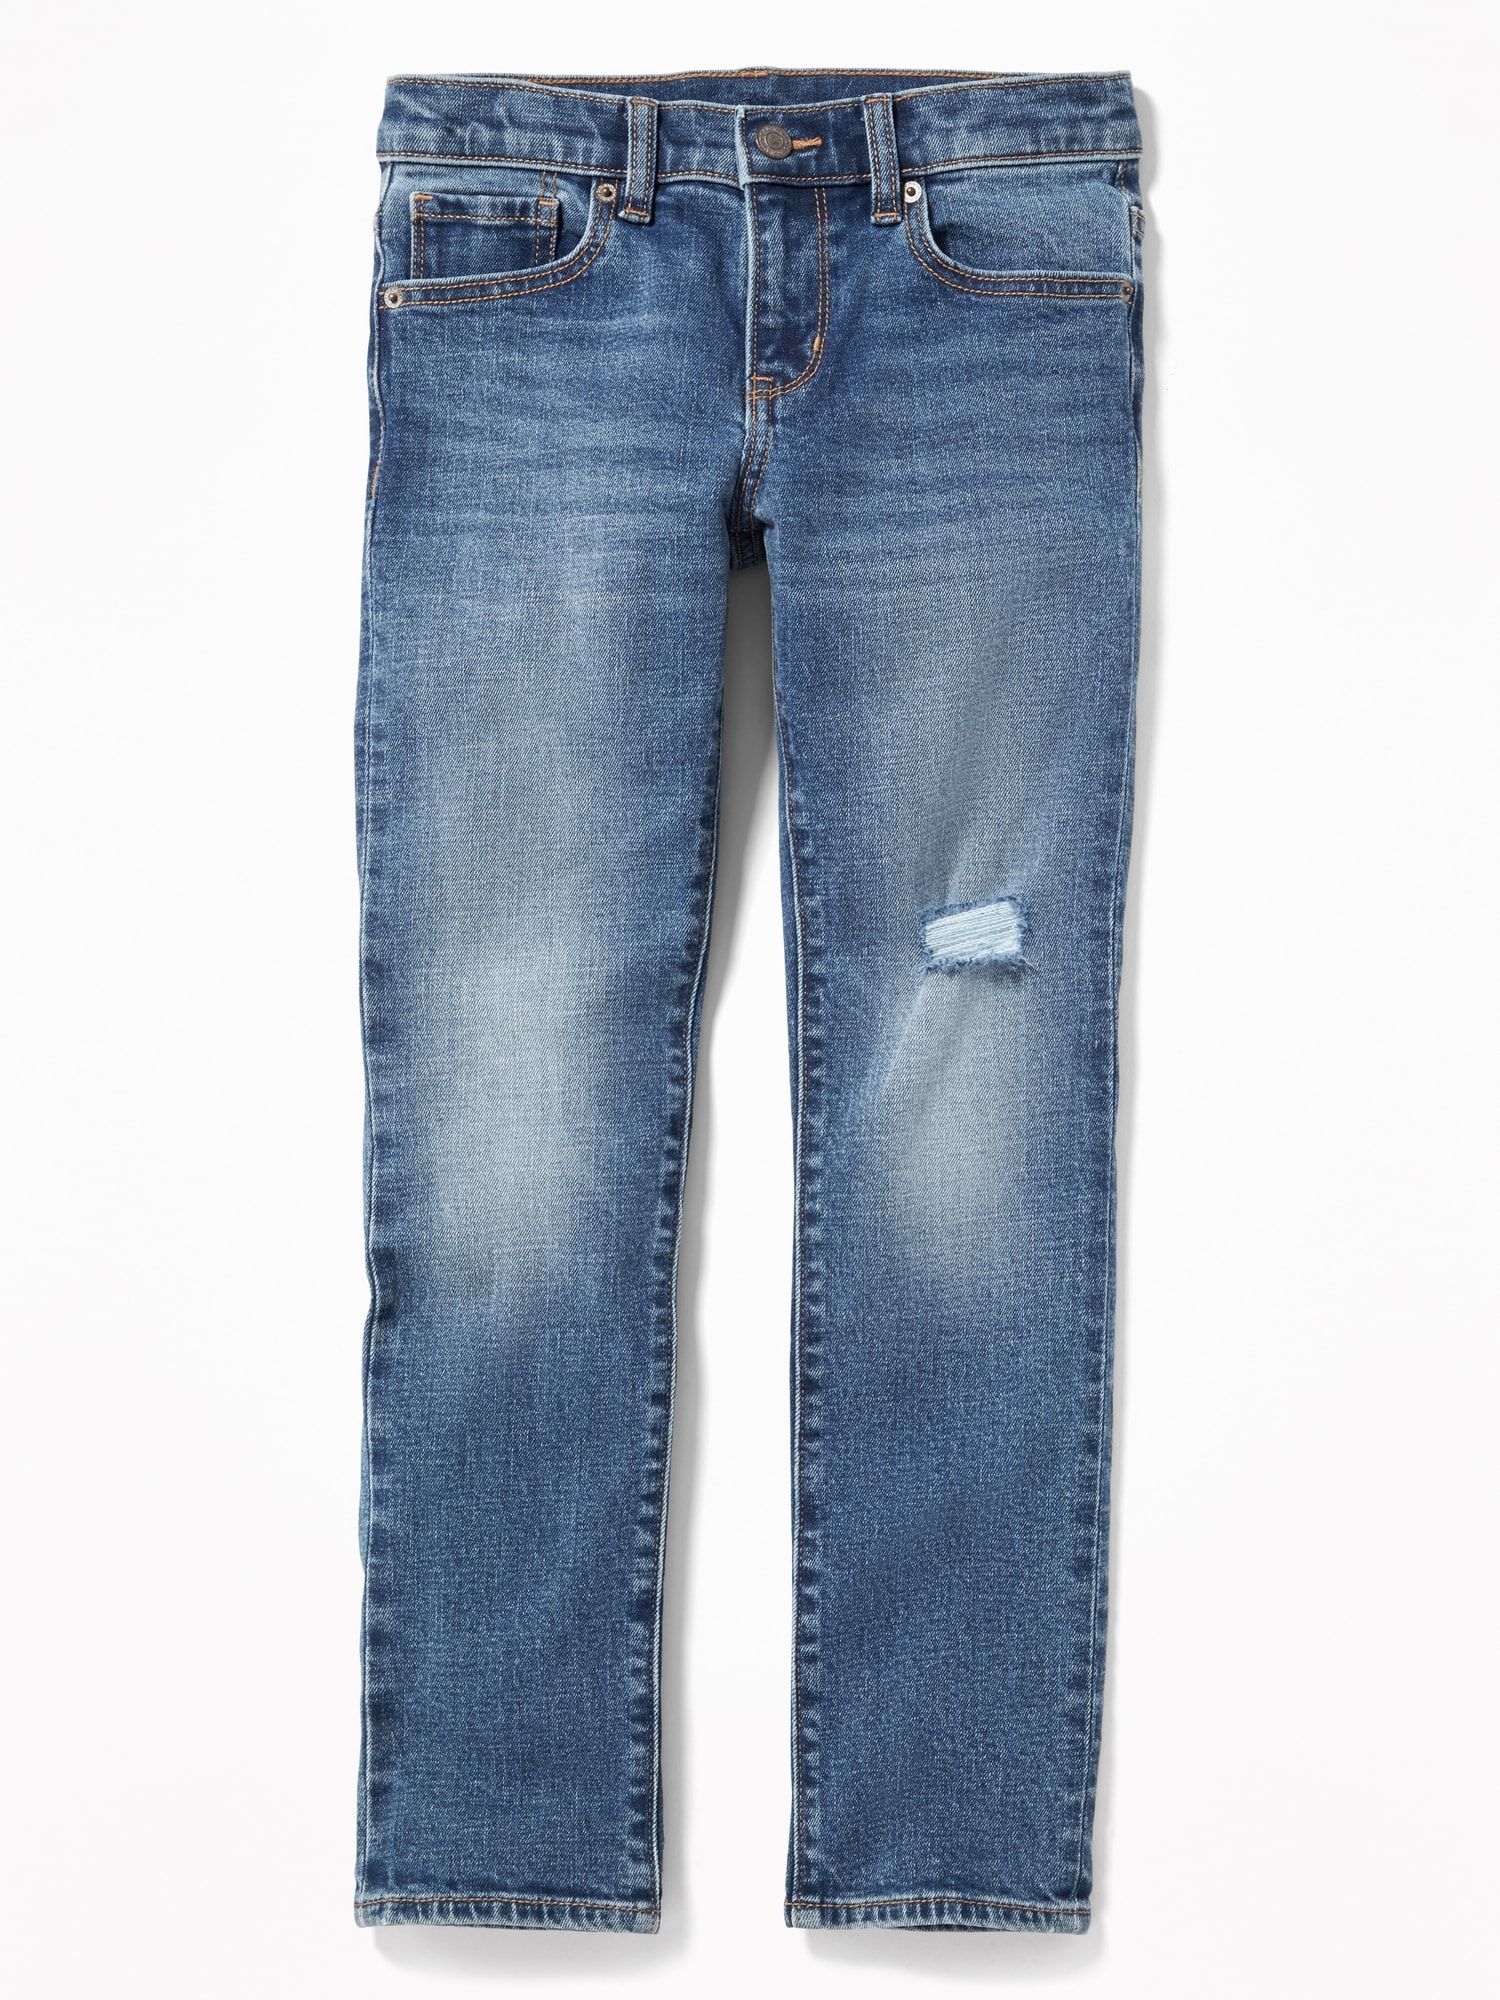 Relaxed Slim Built-In Flex Jeans for Boys | Old Navy